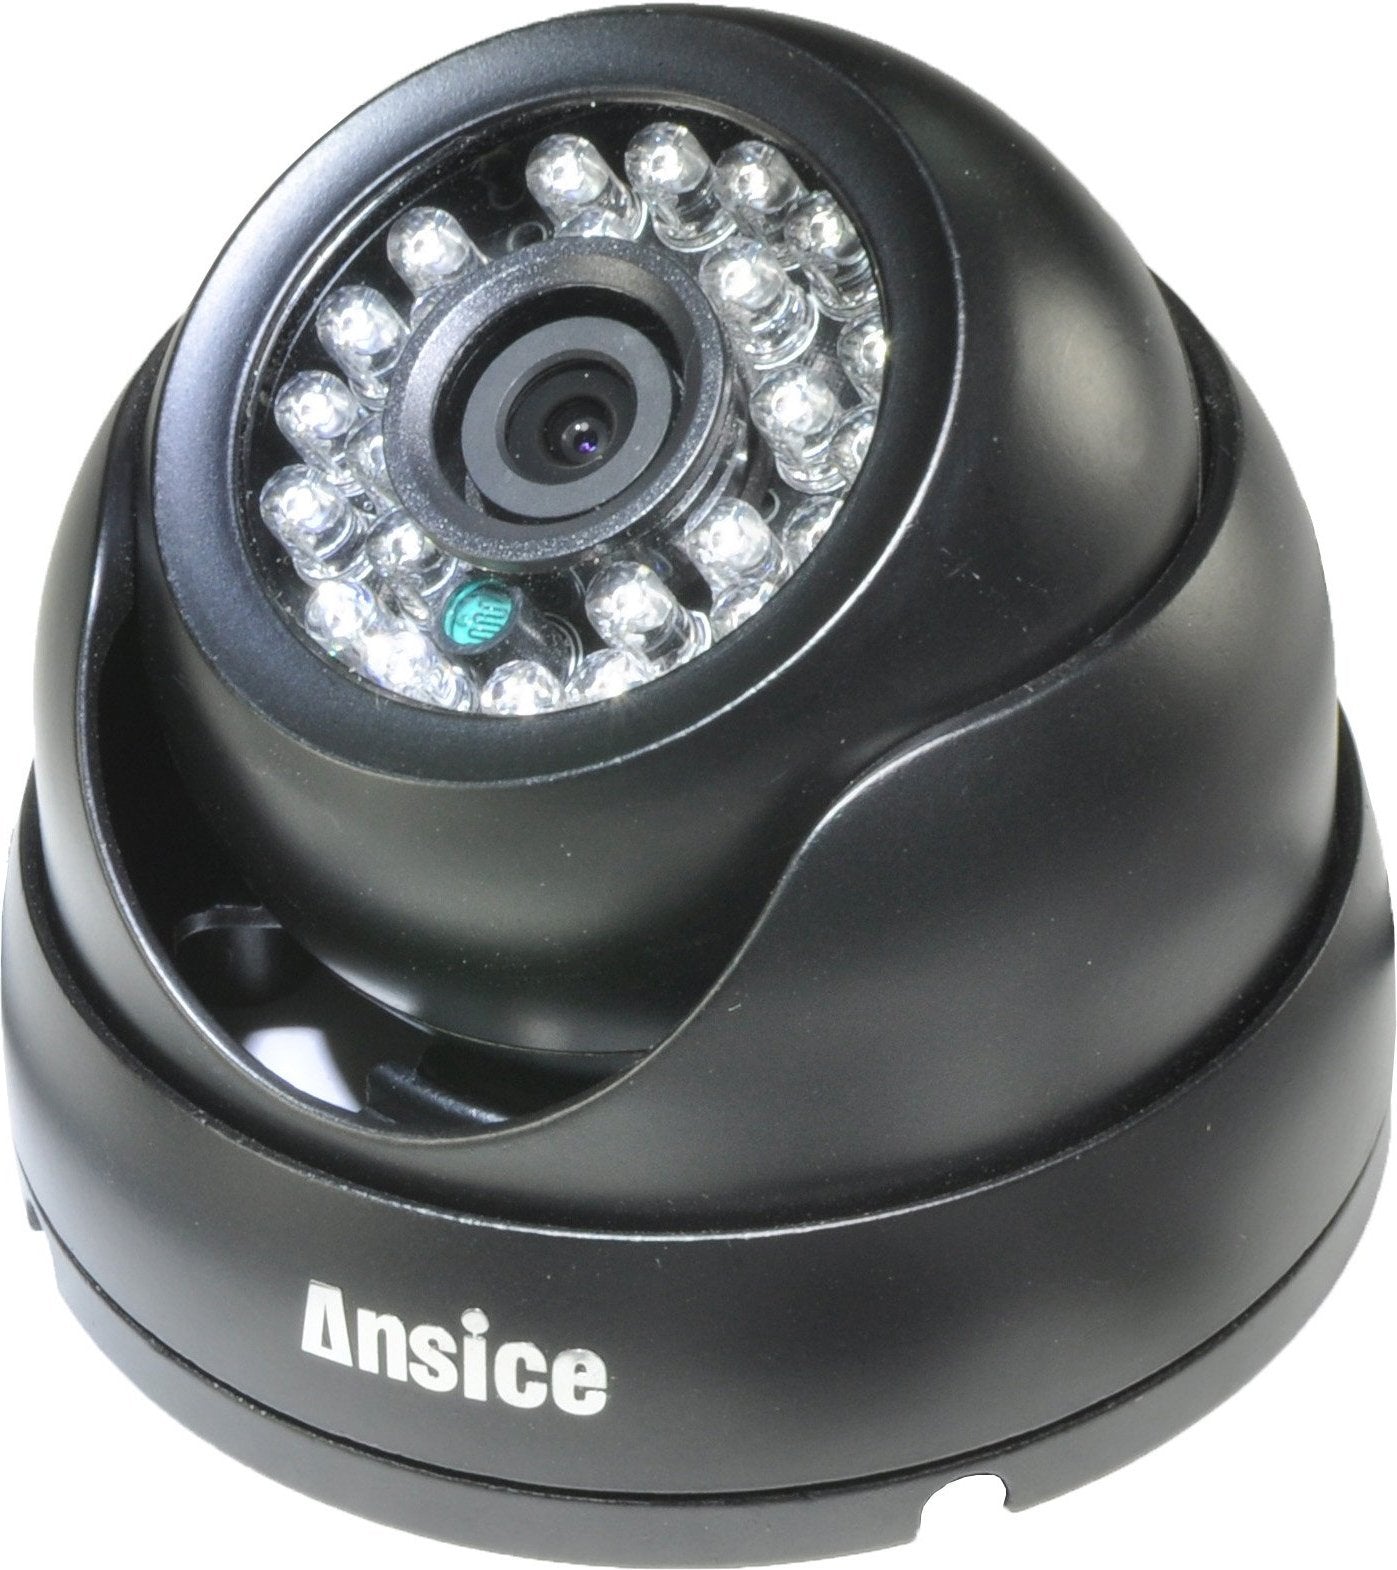 Ansice ACD502 IP Camera 1.0MP 720p 2.0MP 1080p 4MP 2k Network Onvif Camera for NVR Night Version 3.6mm 6mm lens - ansice